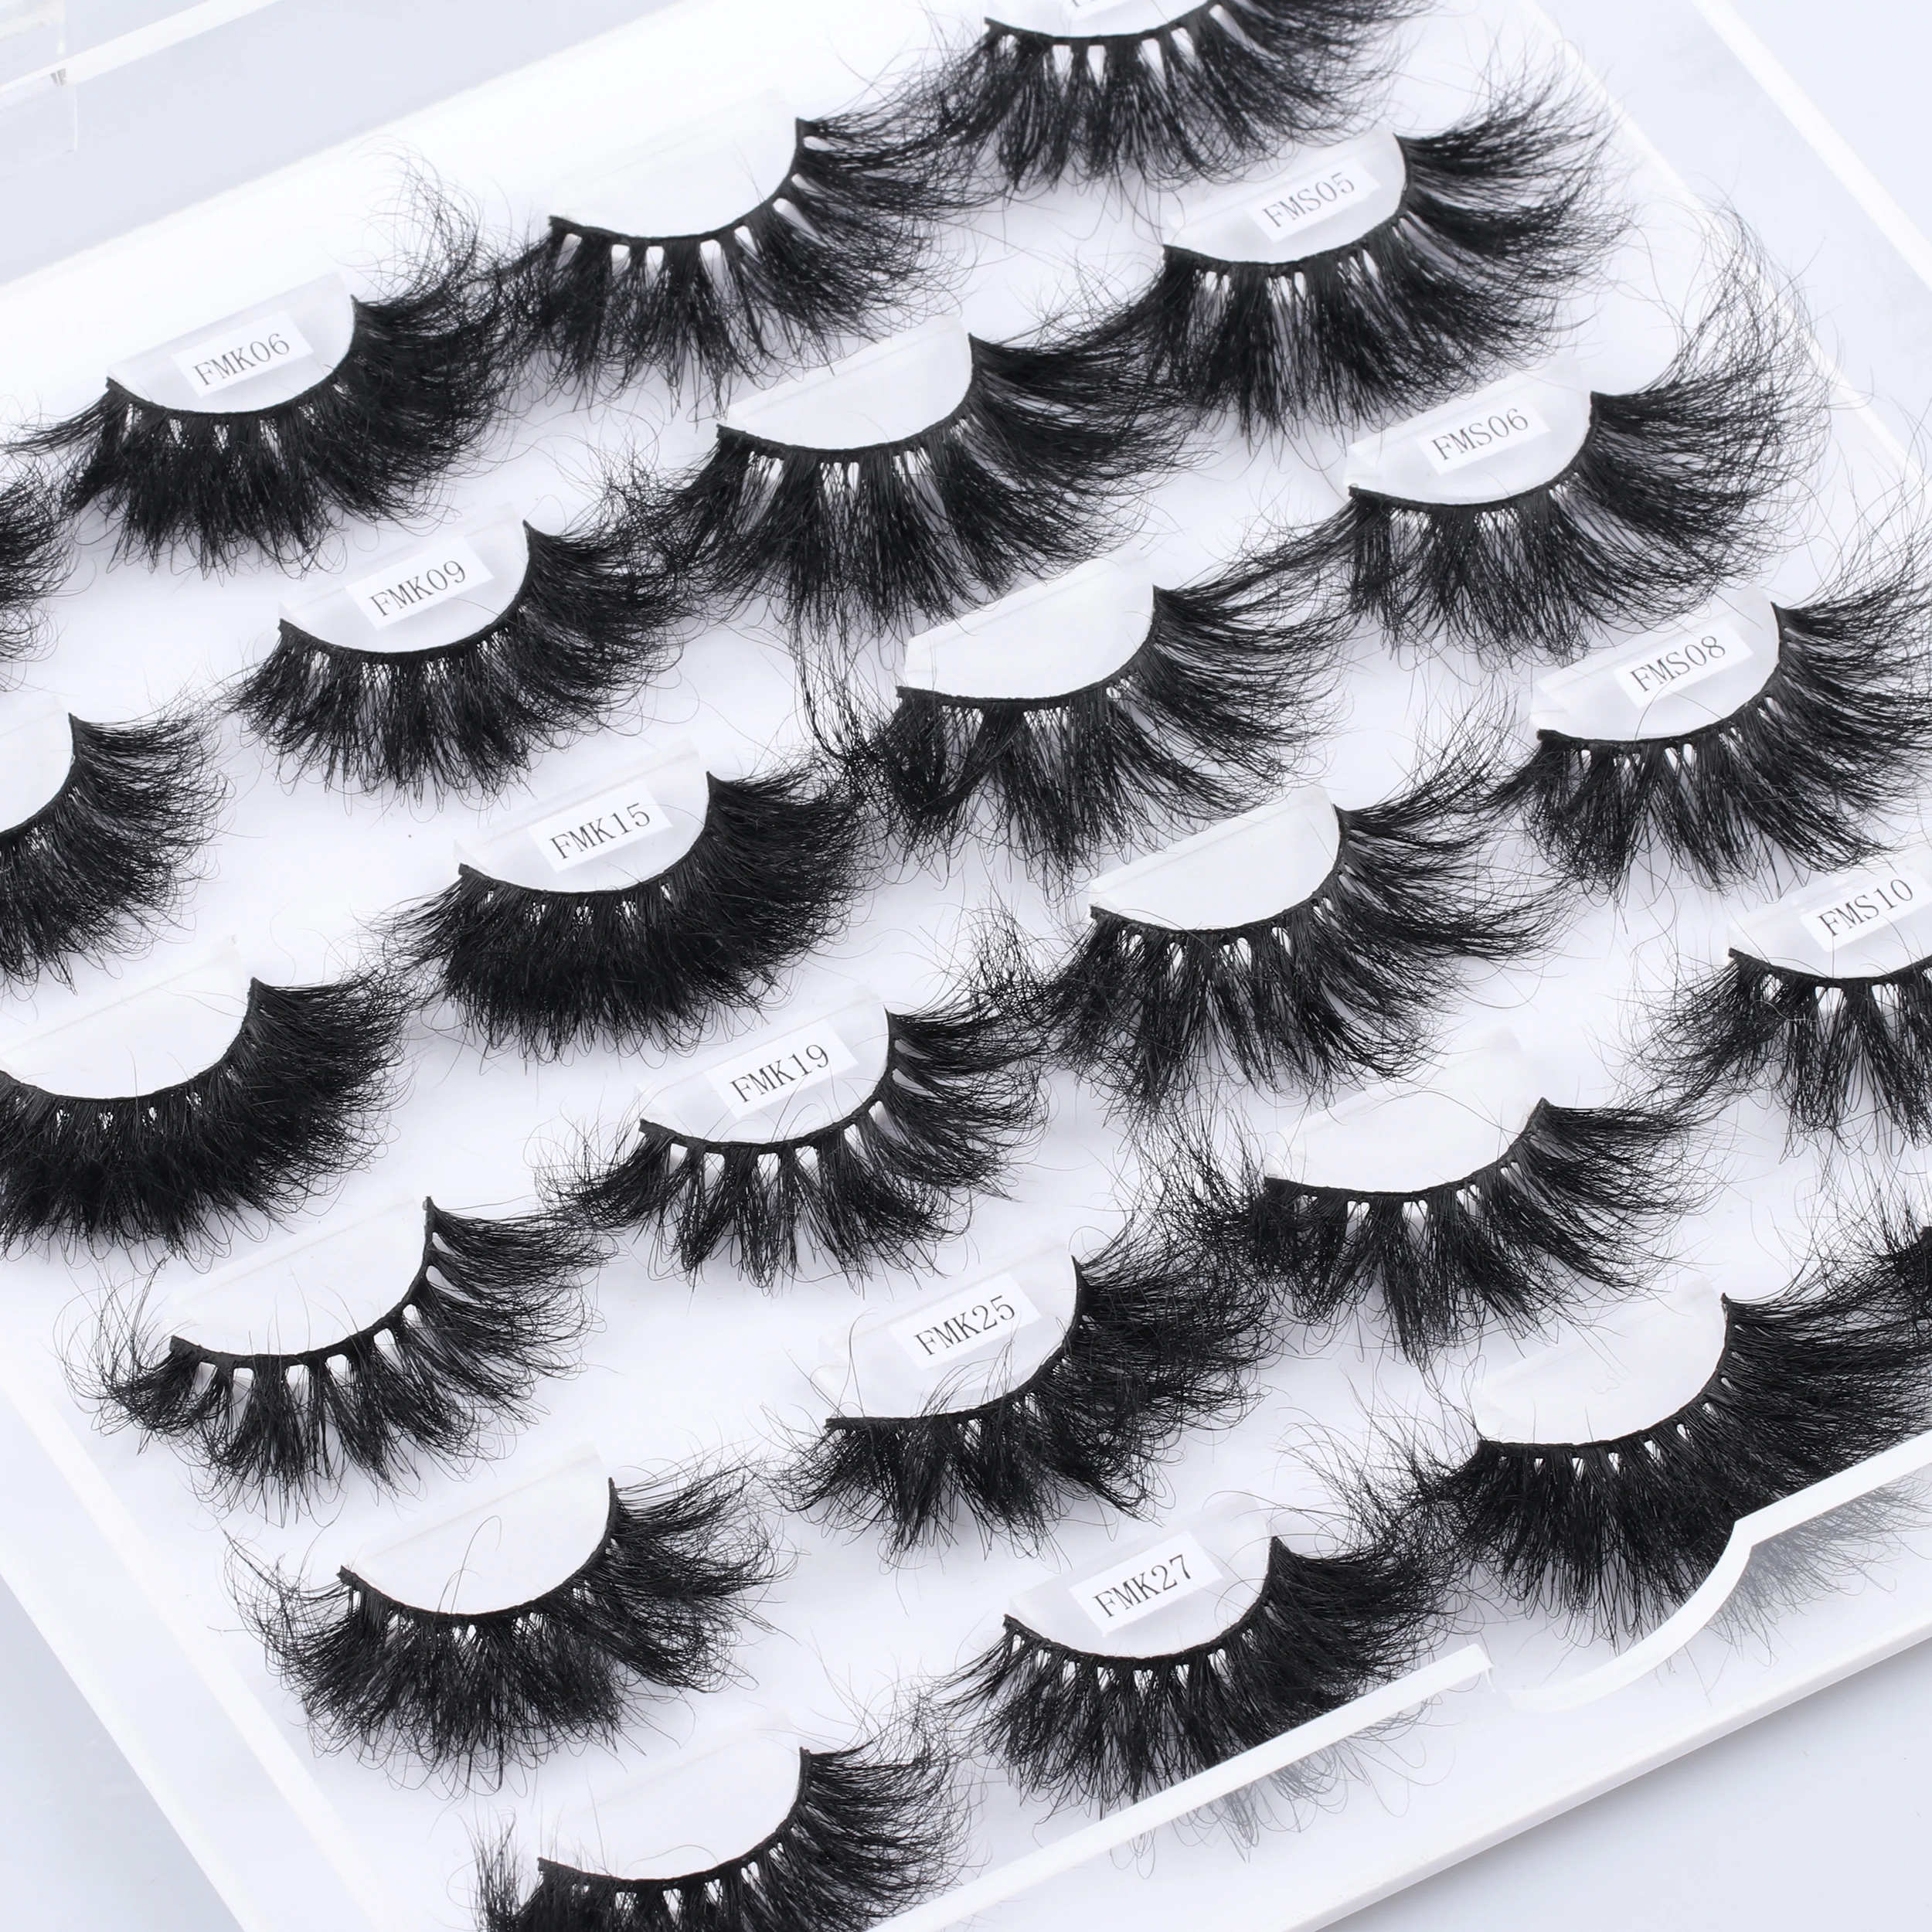 

Lashes Own Brand Mink Eyelashes 3D Mink Lashes, All the color you like